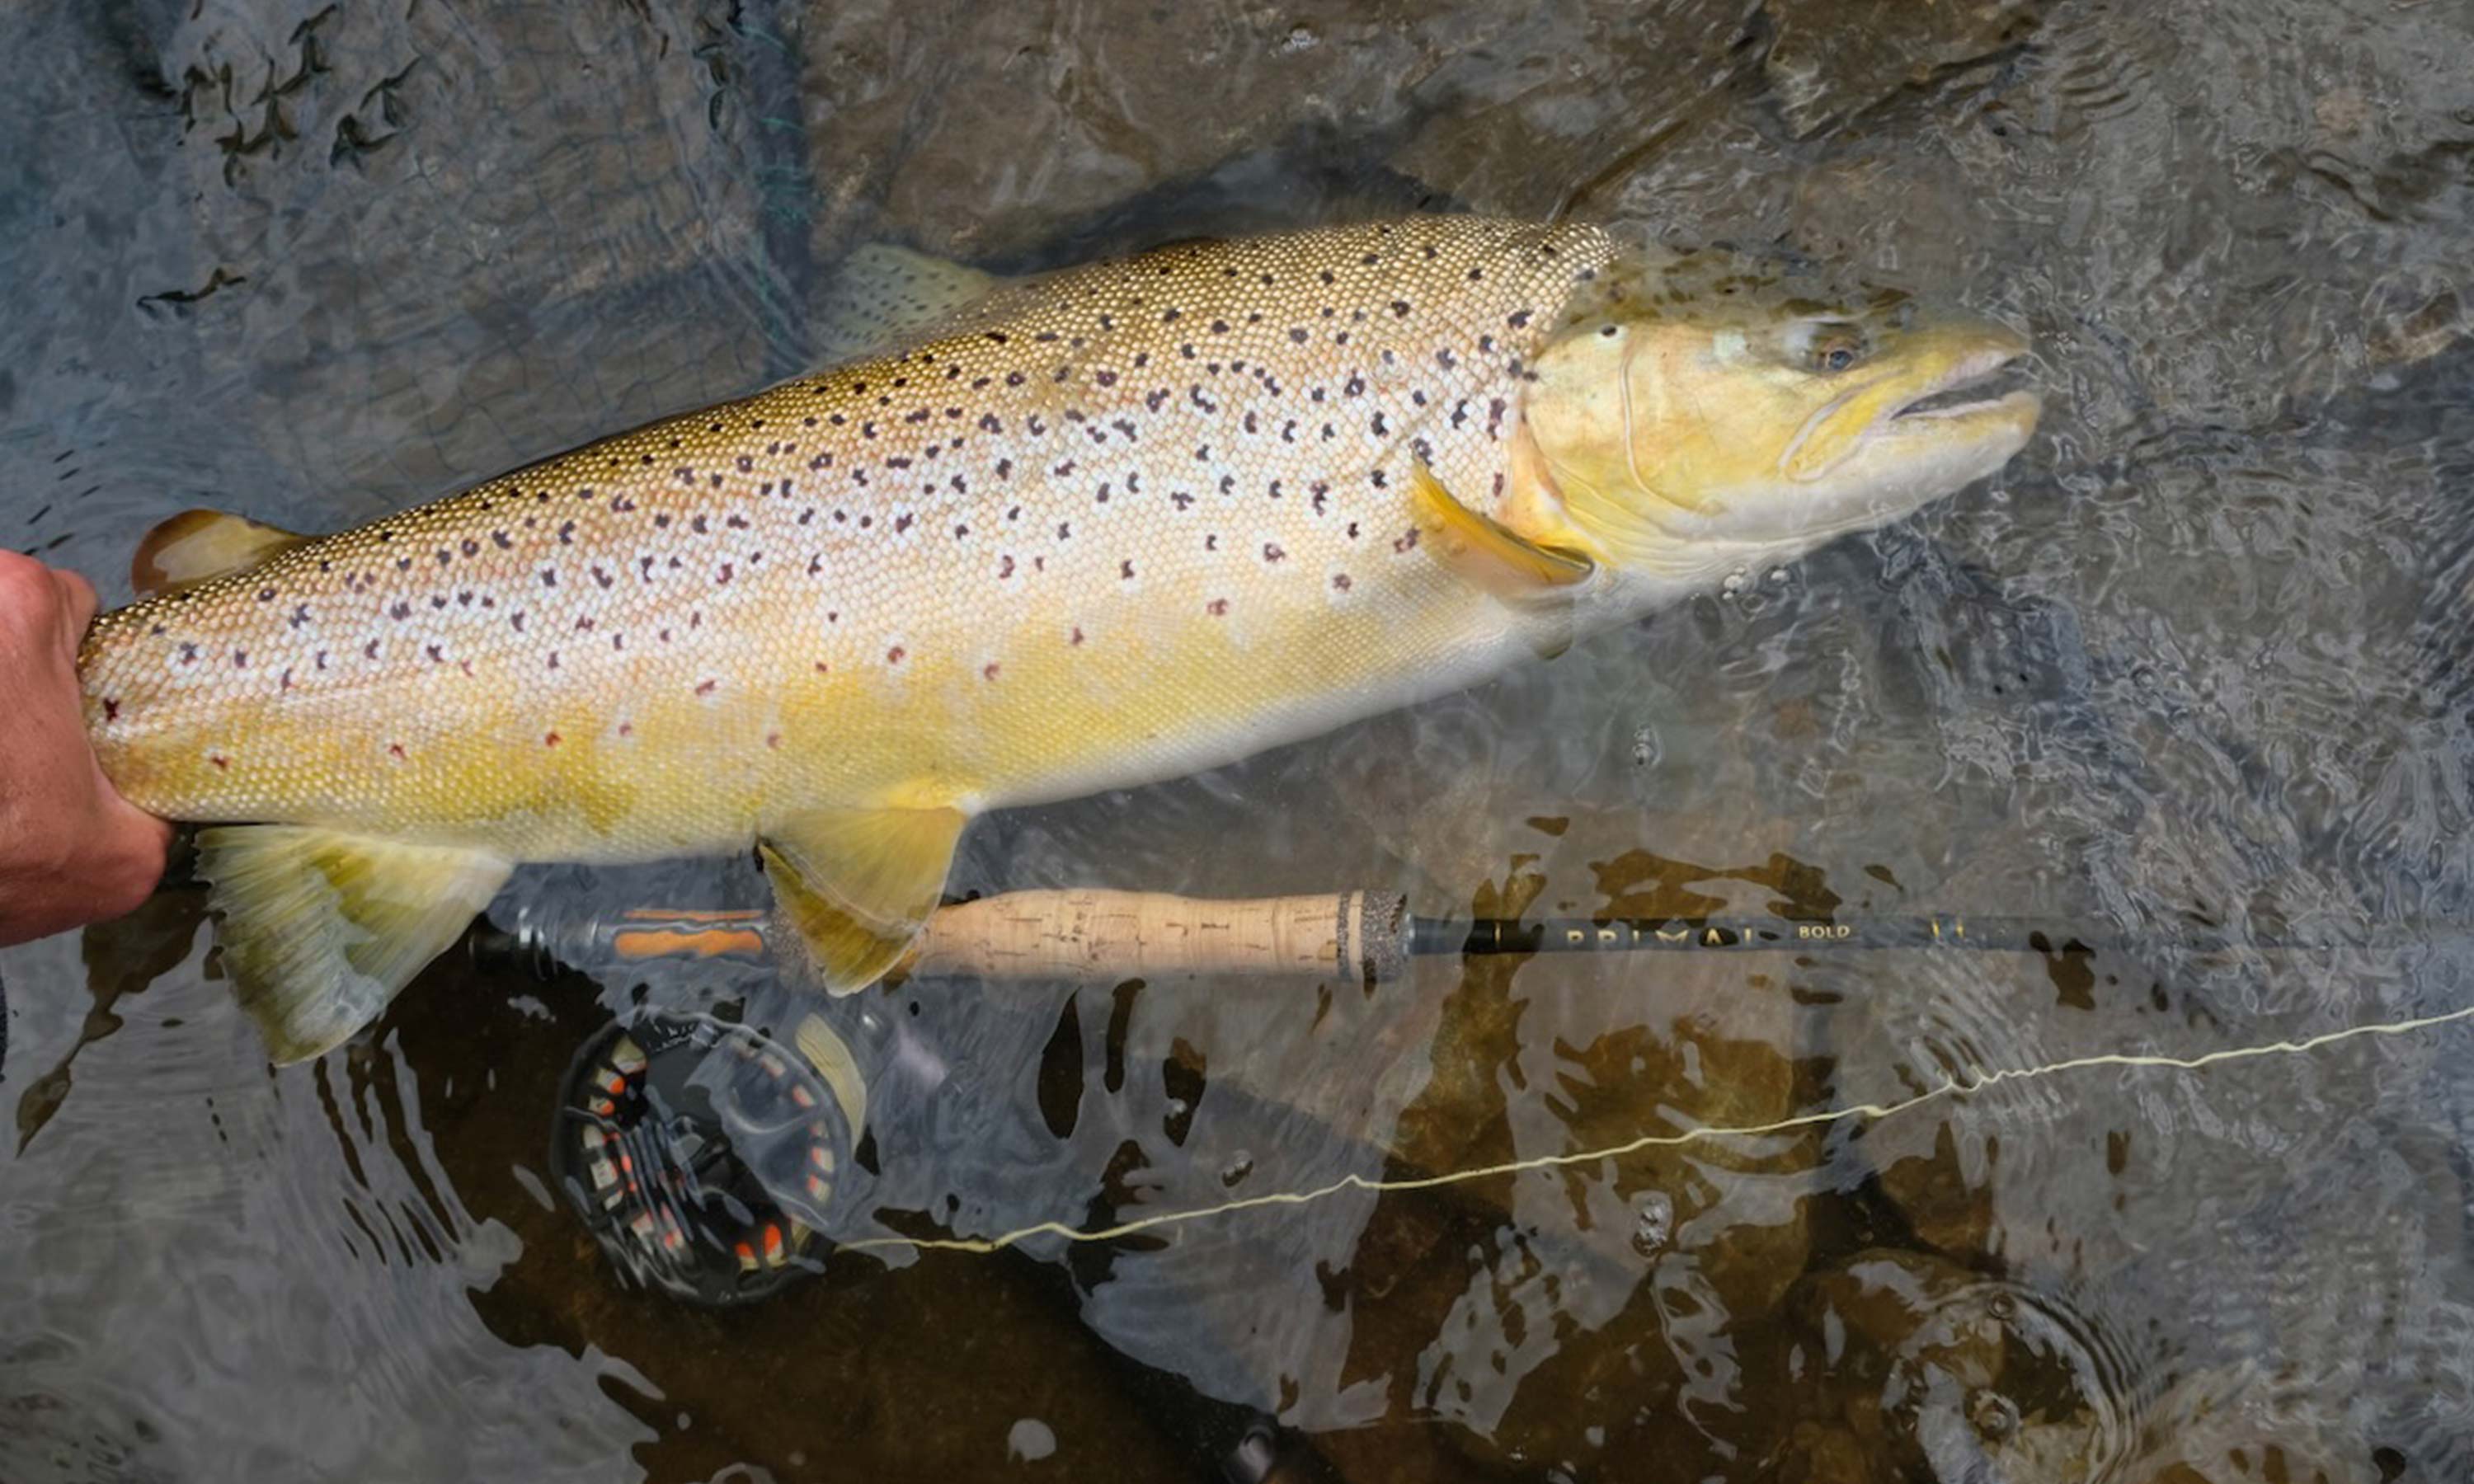 On the fly: Après with your fly rod